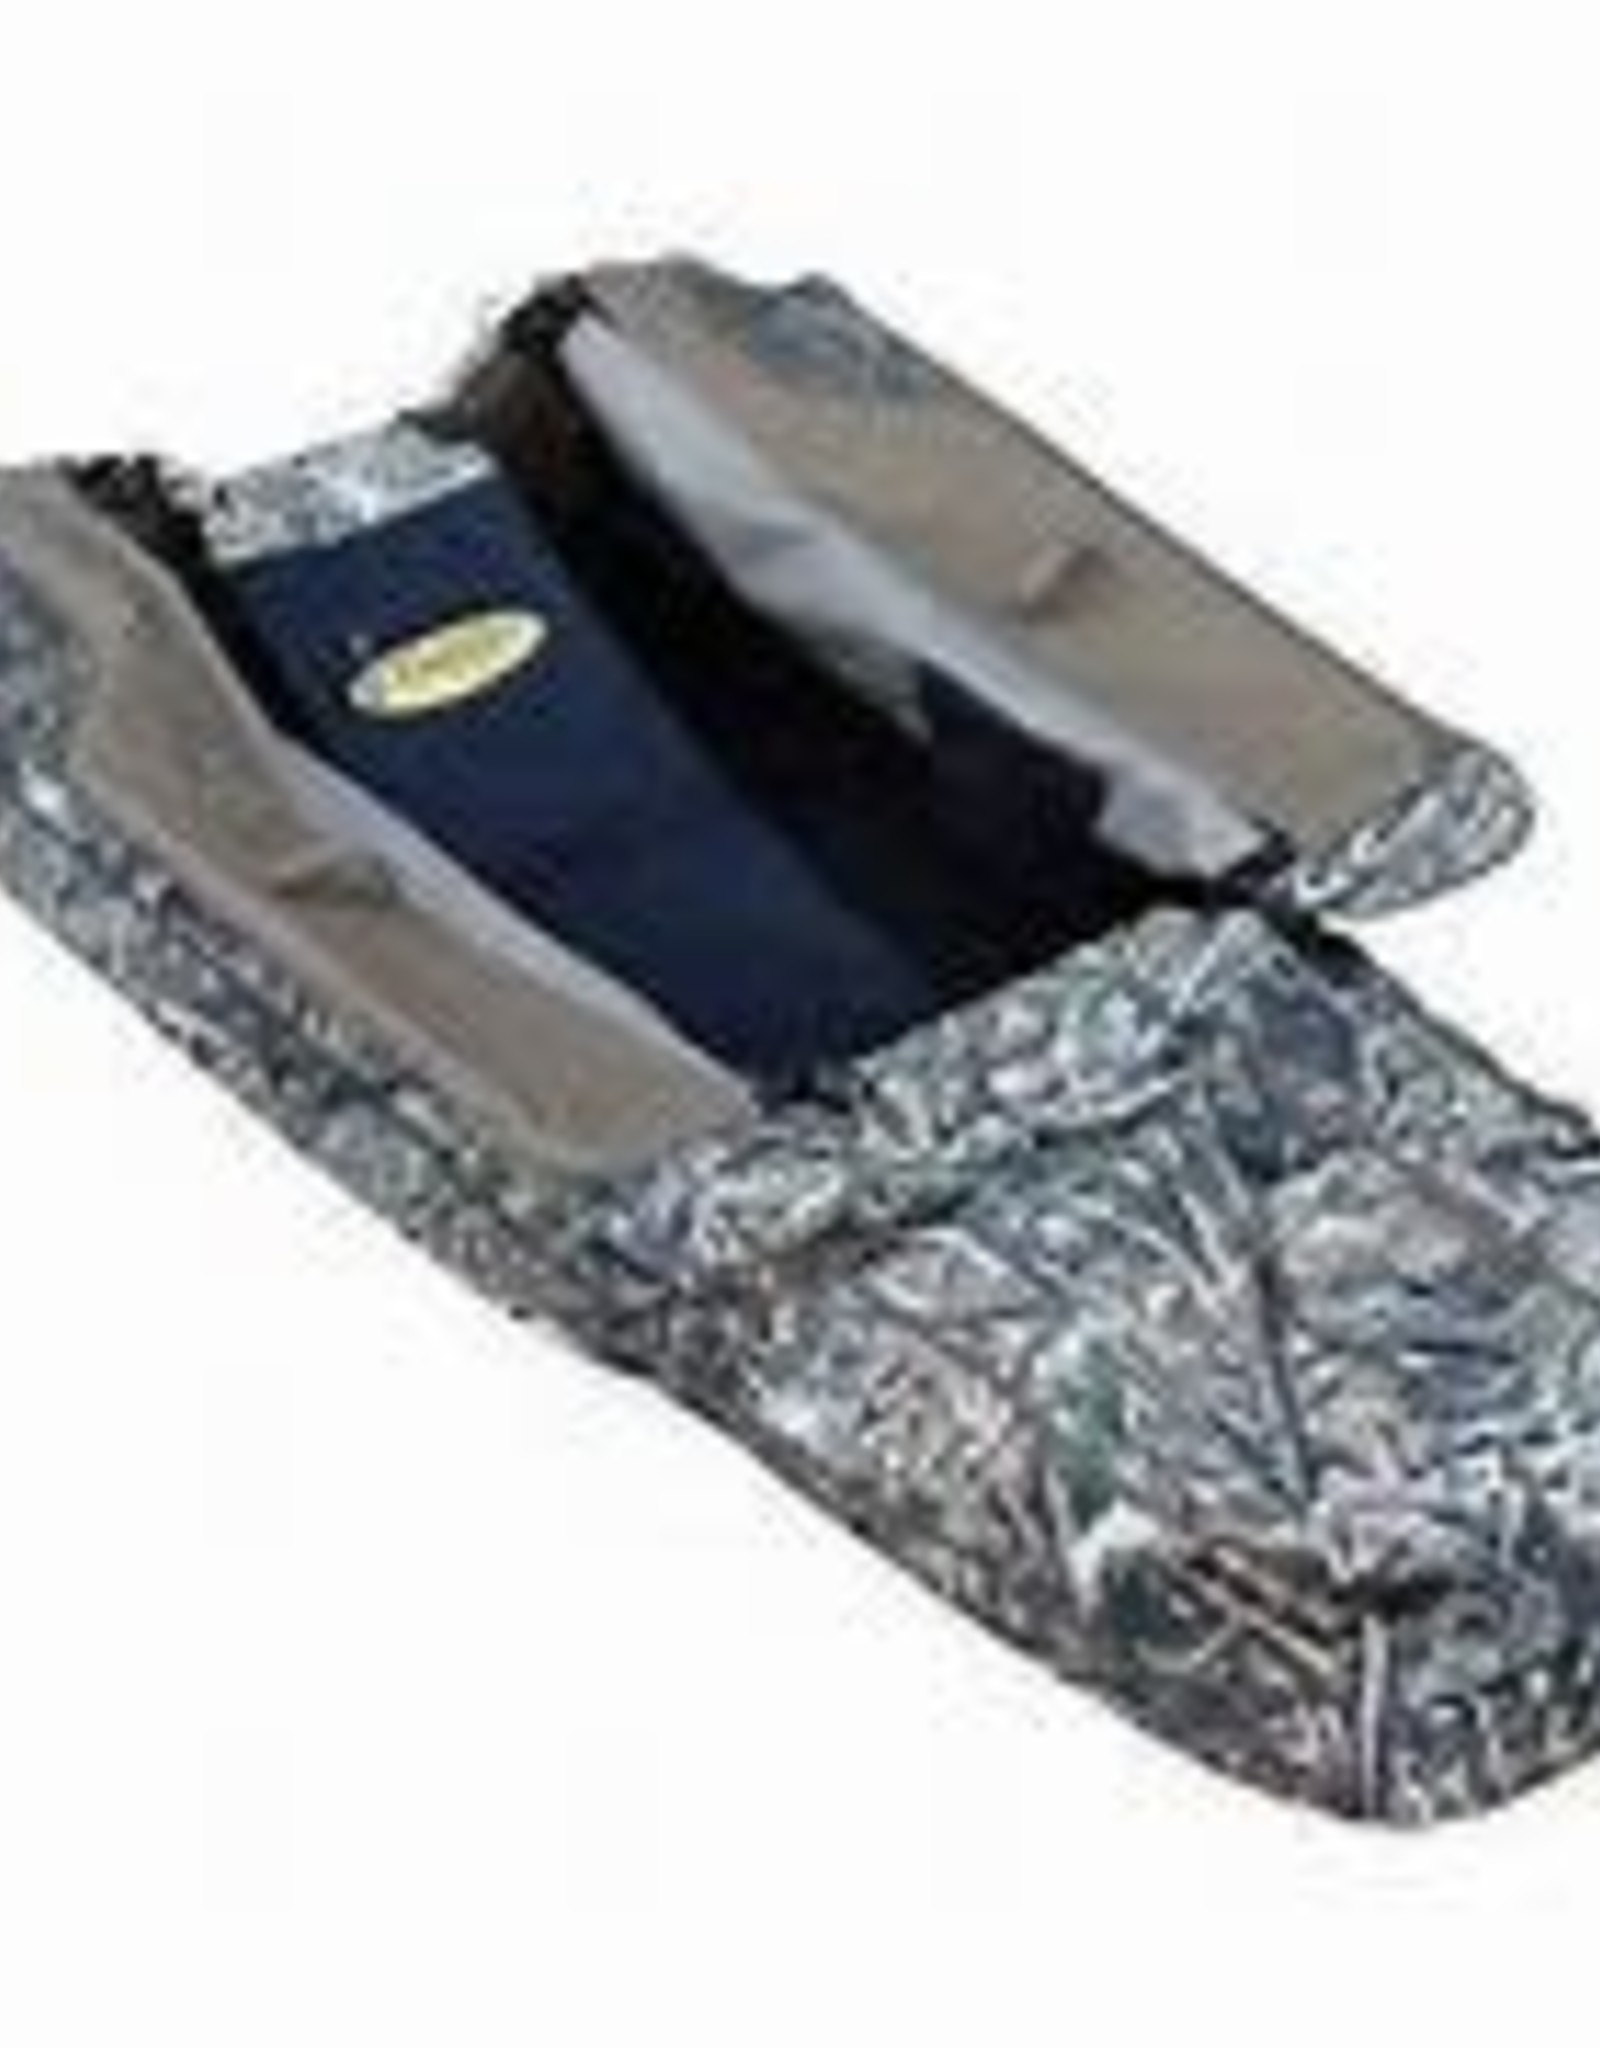 Avery Outfitter Layout Blind Heavy-Duty Metal Framed